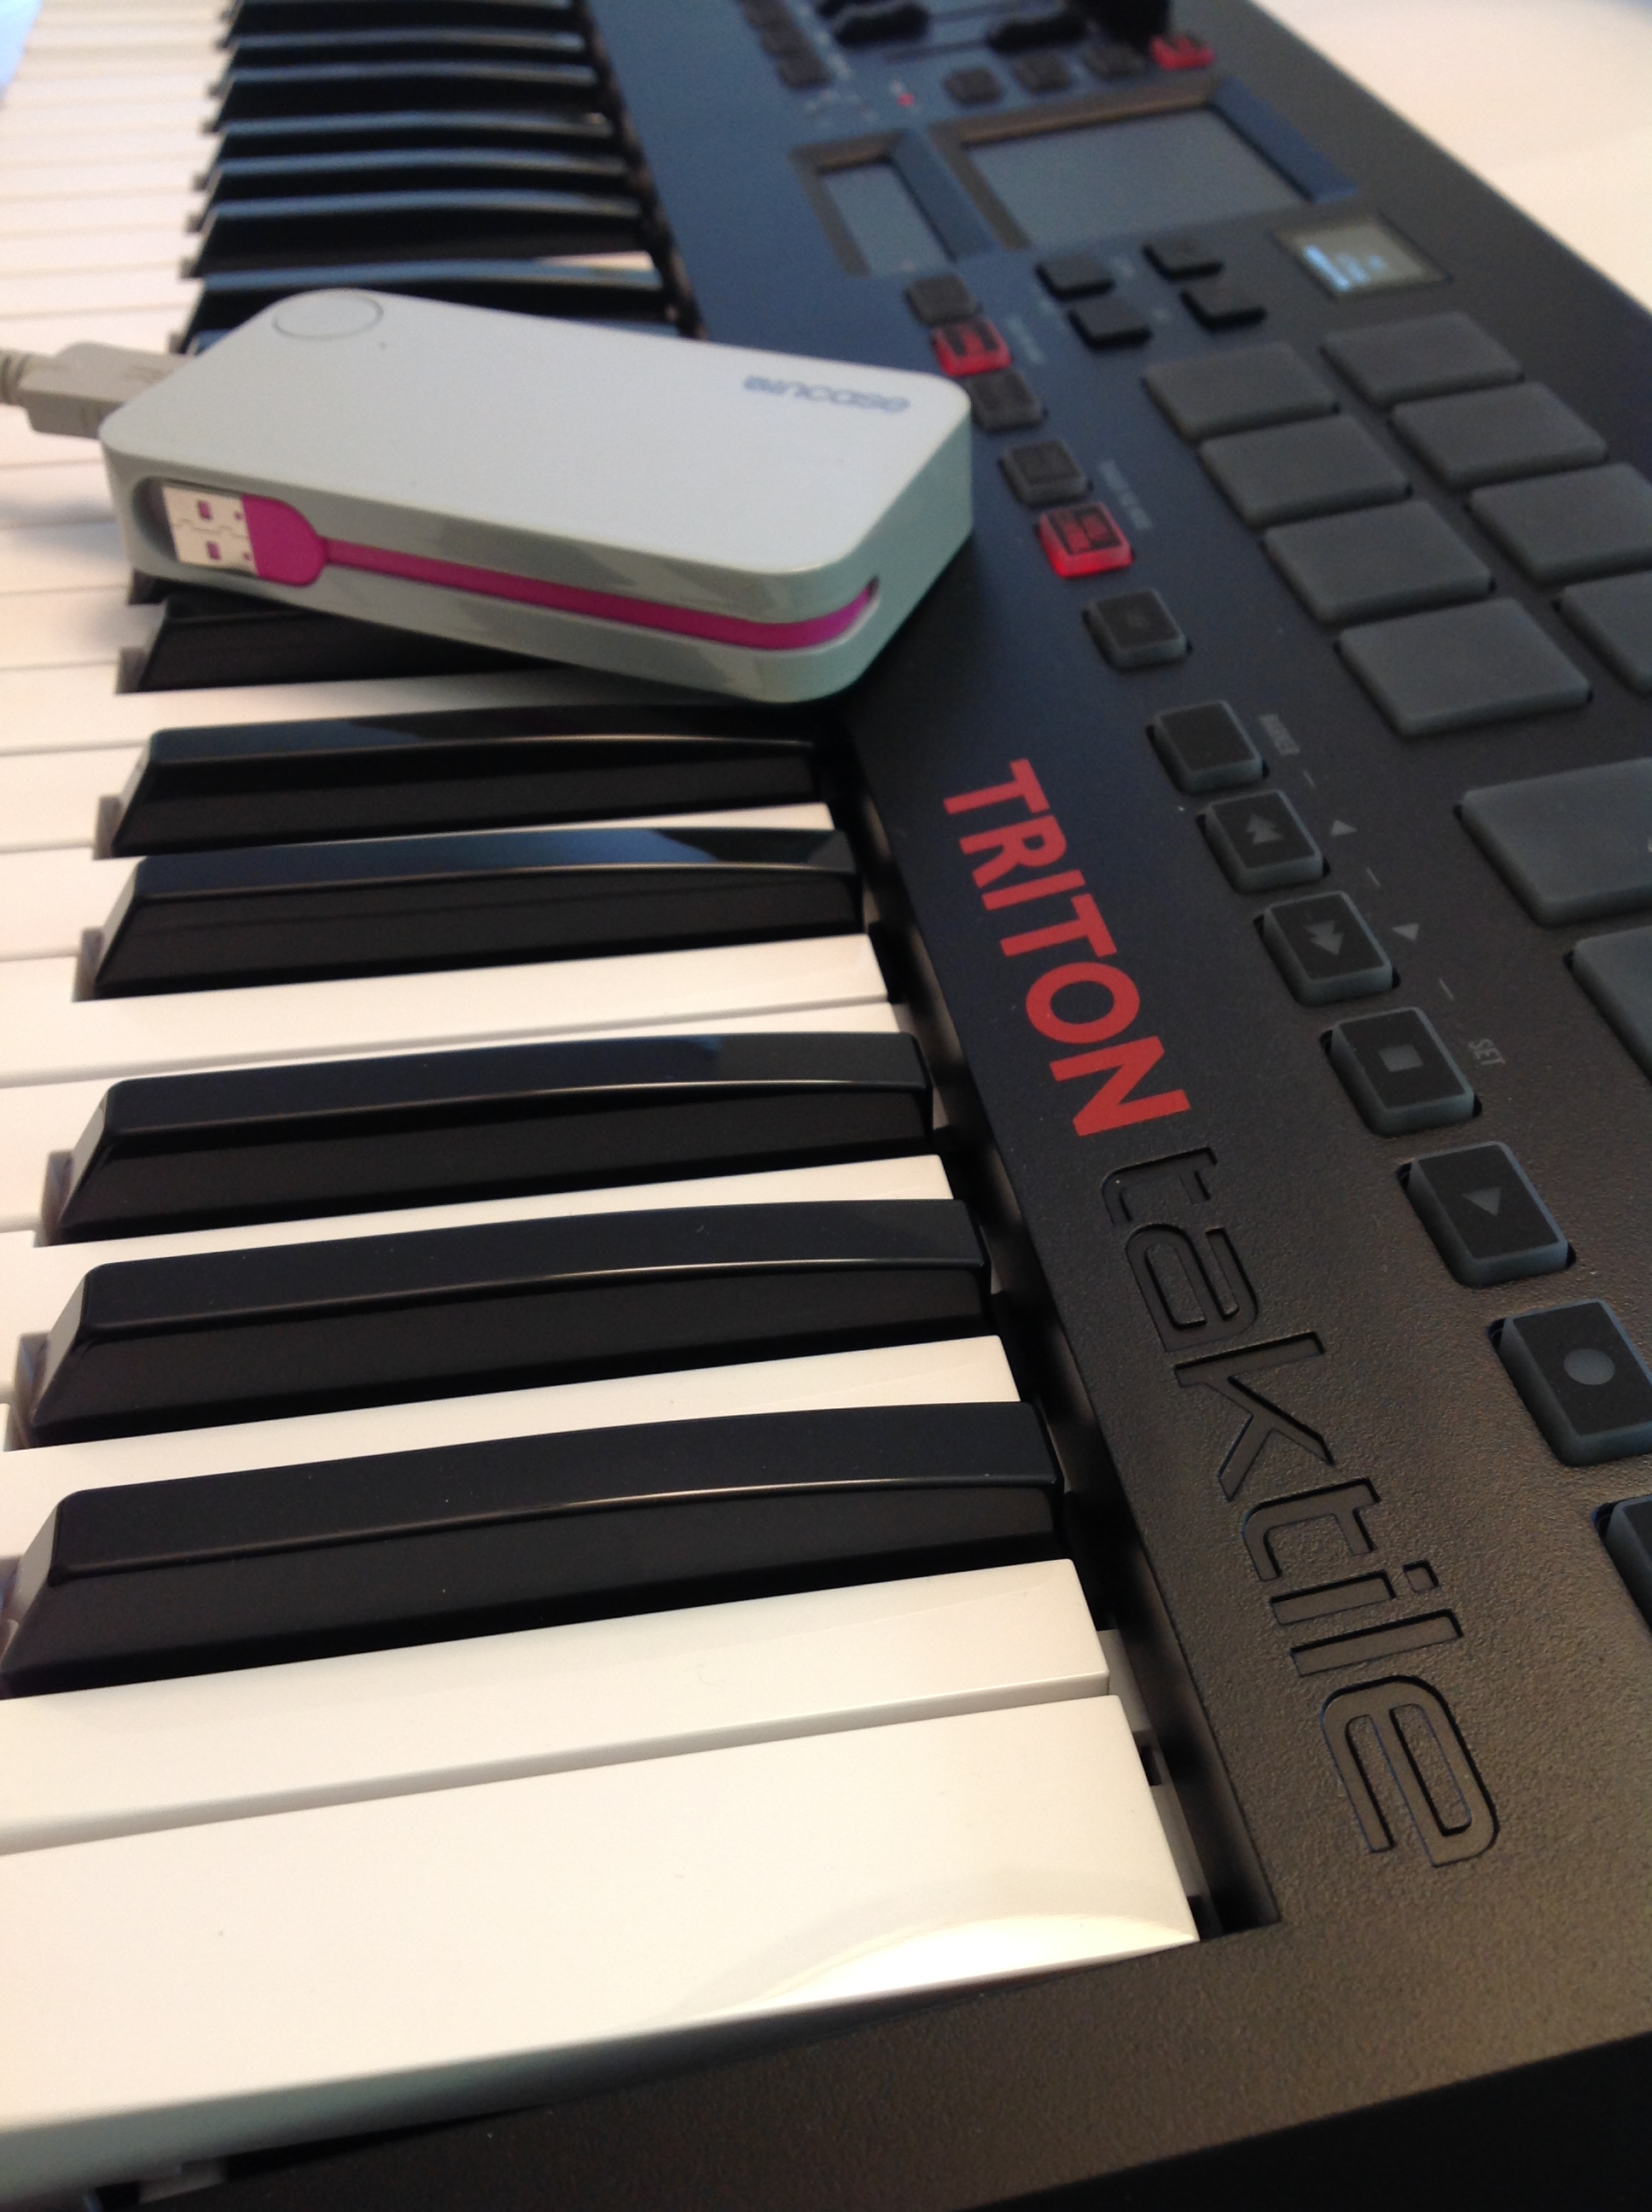 architect wear assistance Korg Triton Taktile: Snap Review | Sand, software and sound